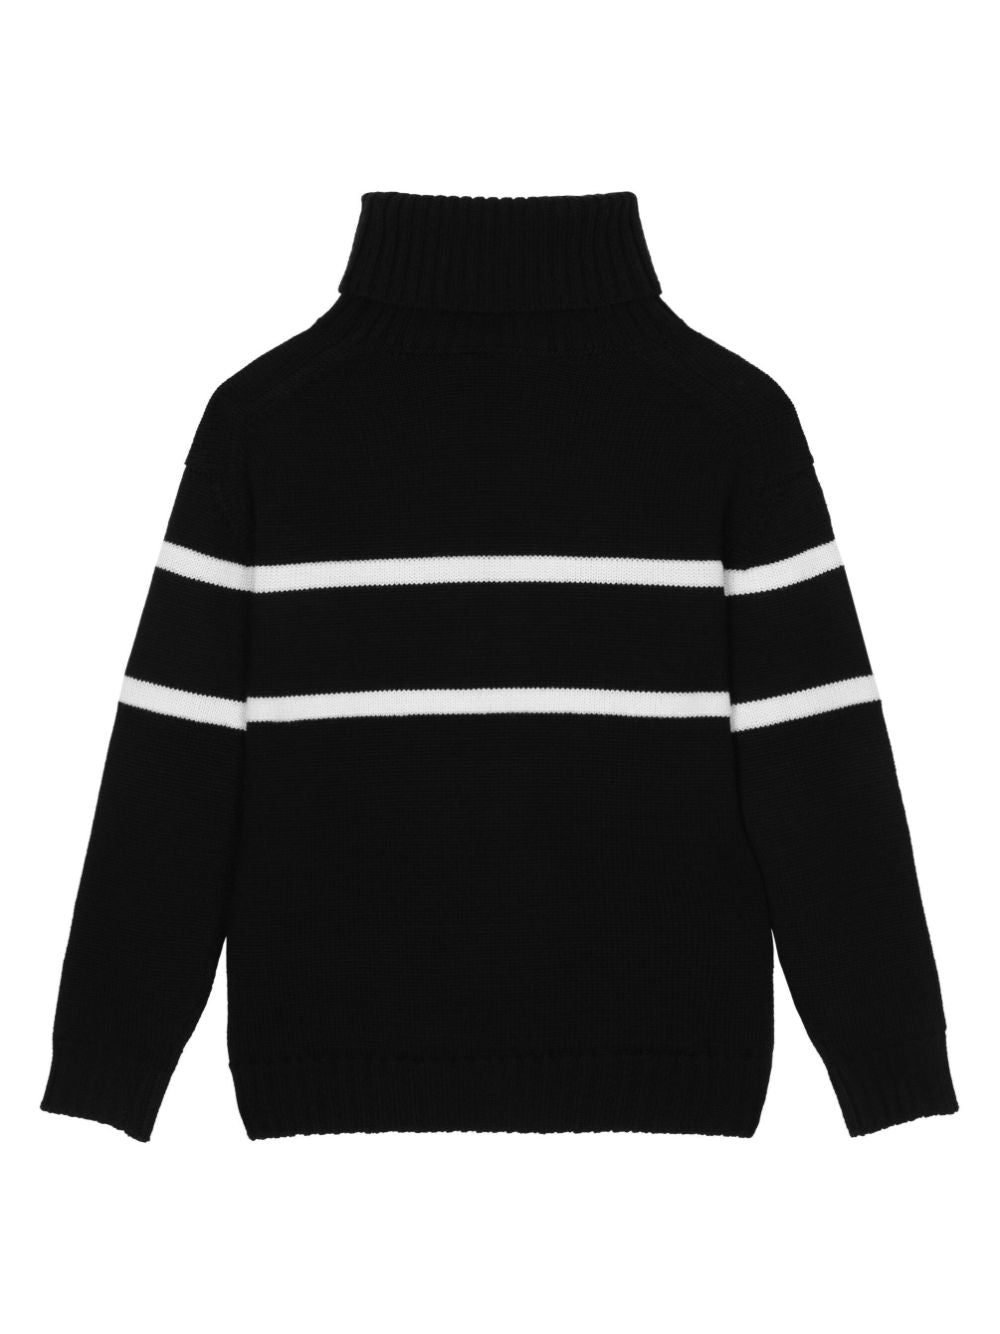 Black sweater with logo for boys